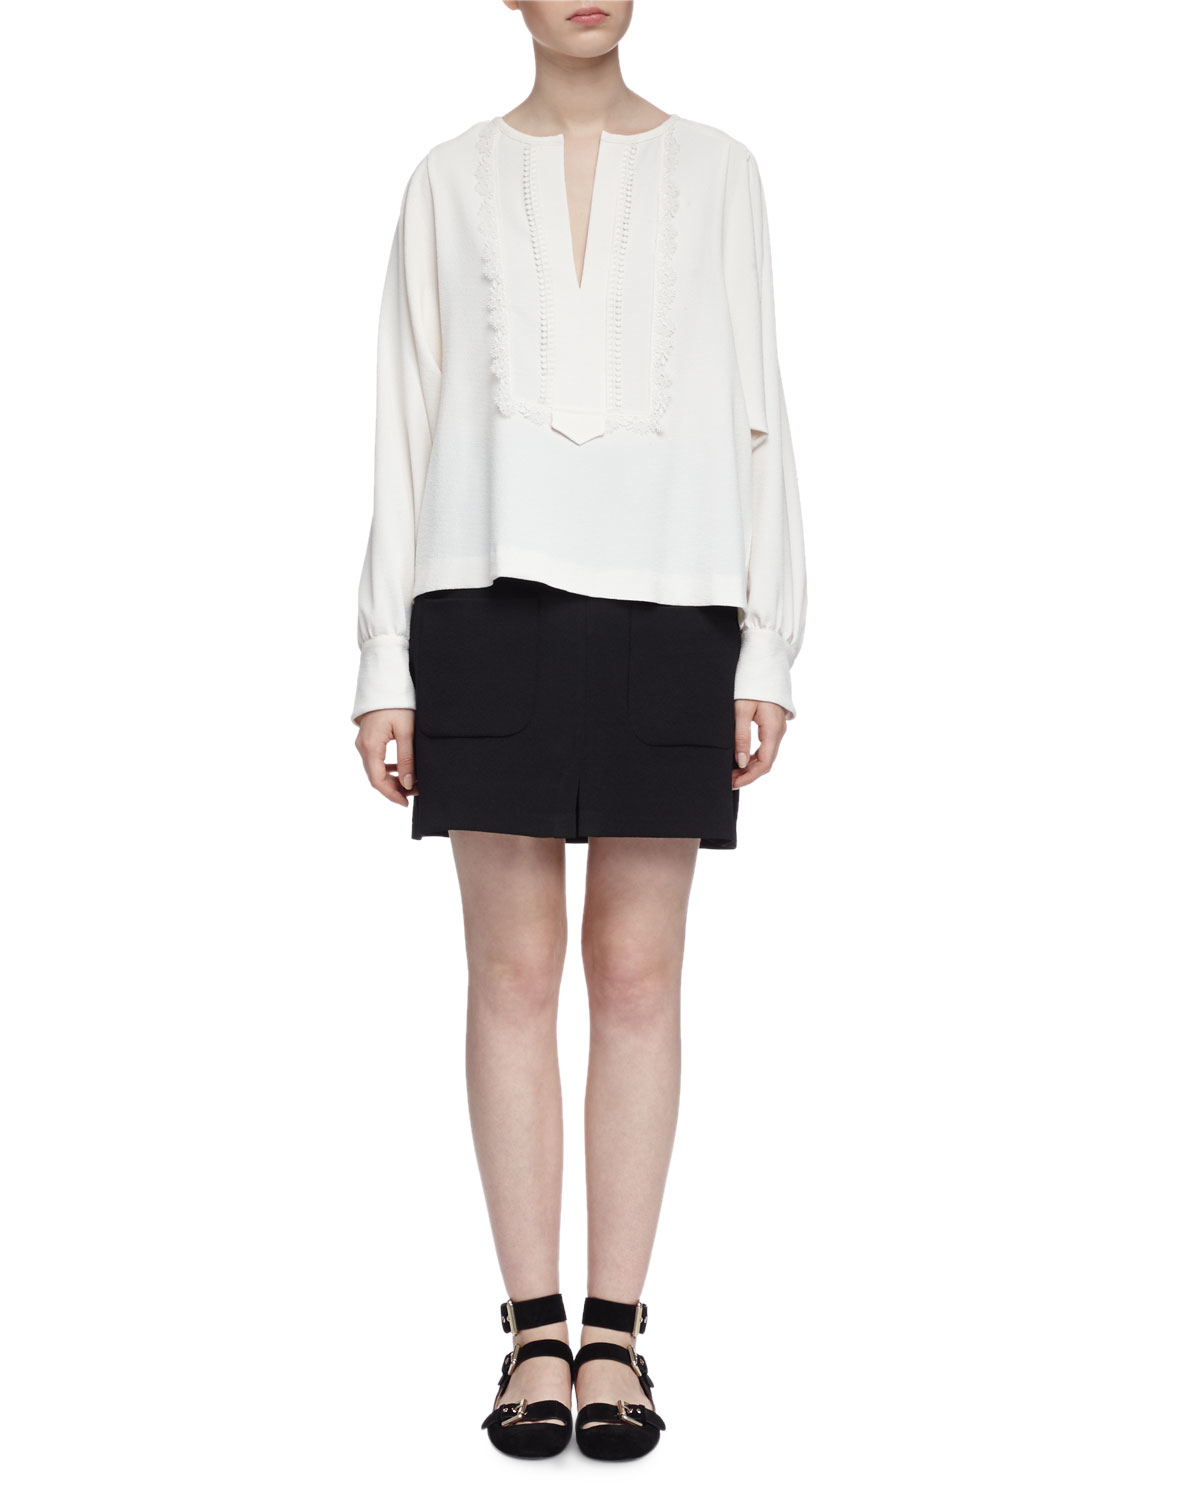 Lyst - See By Chloé Long-sleeve V-neck Boho Blouse in White